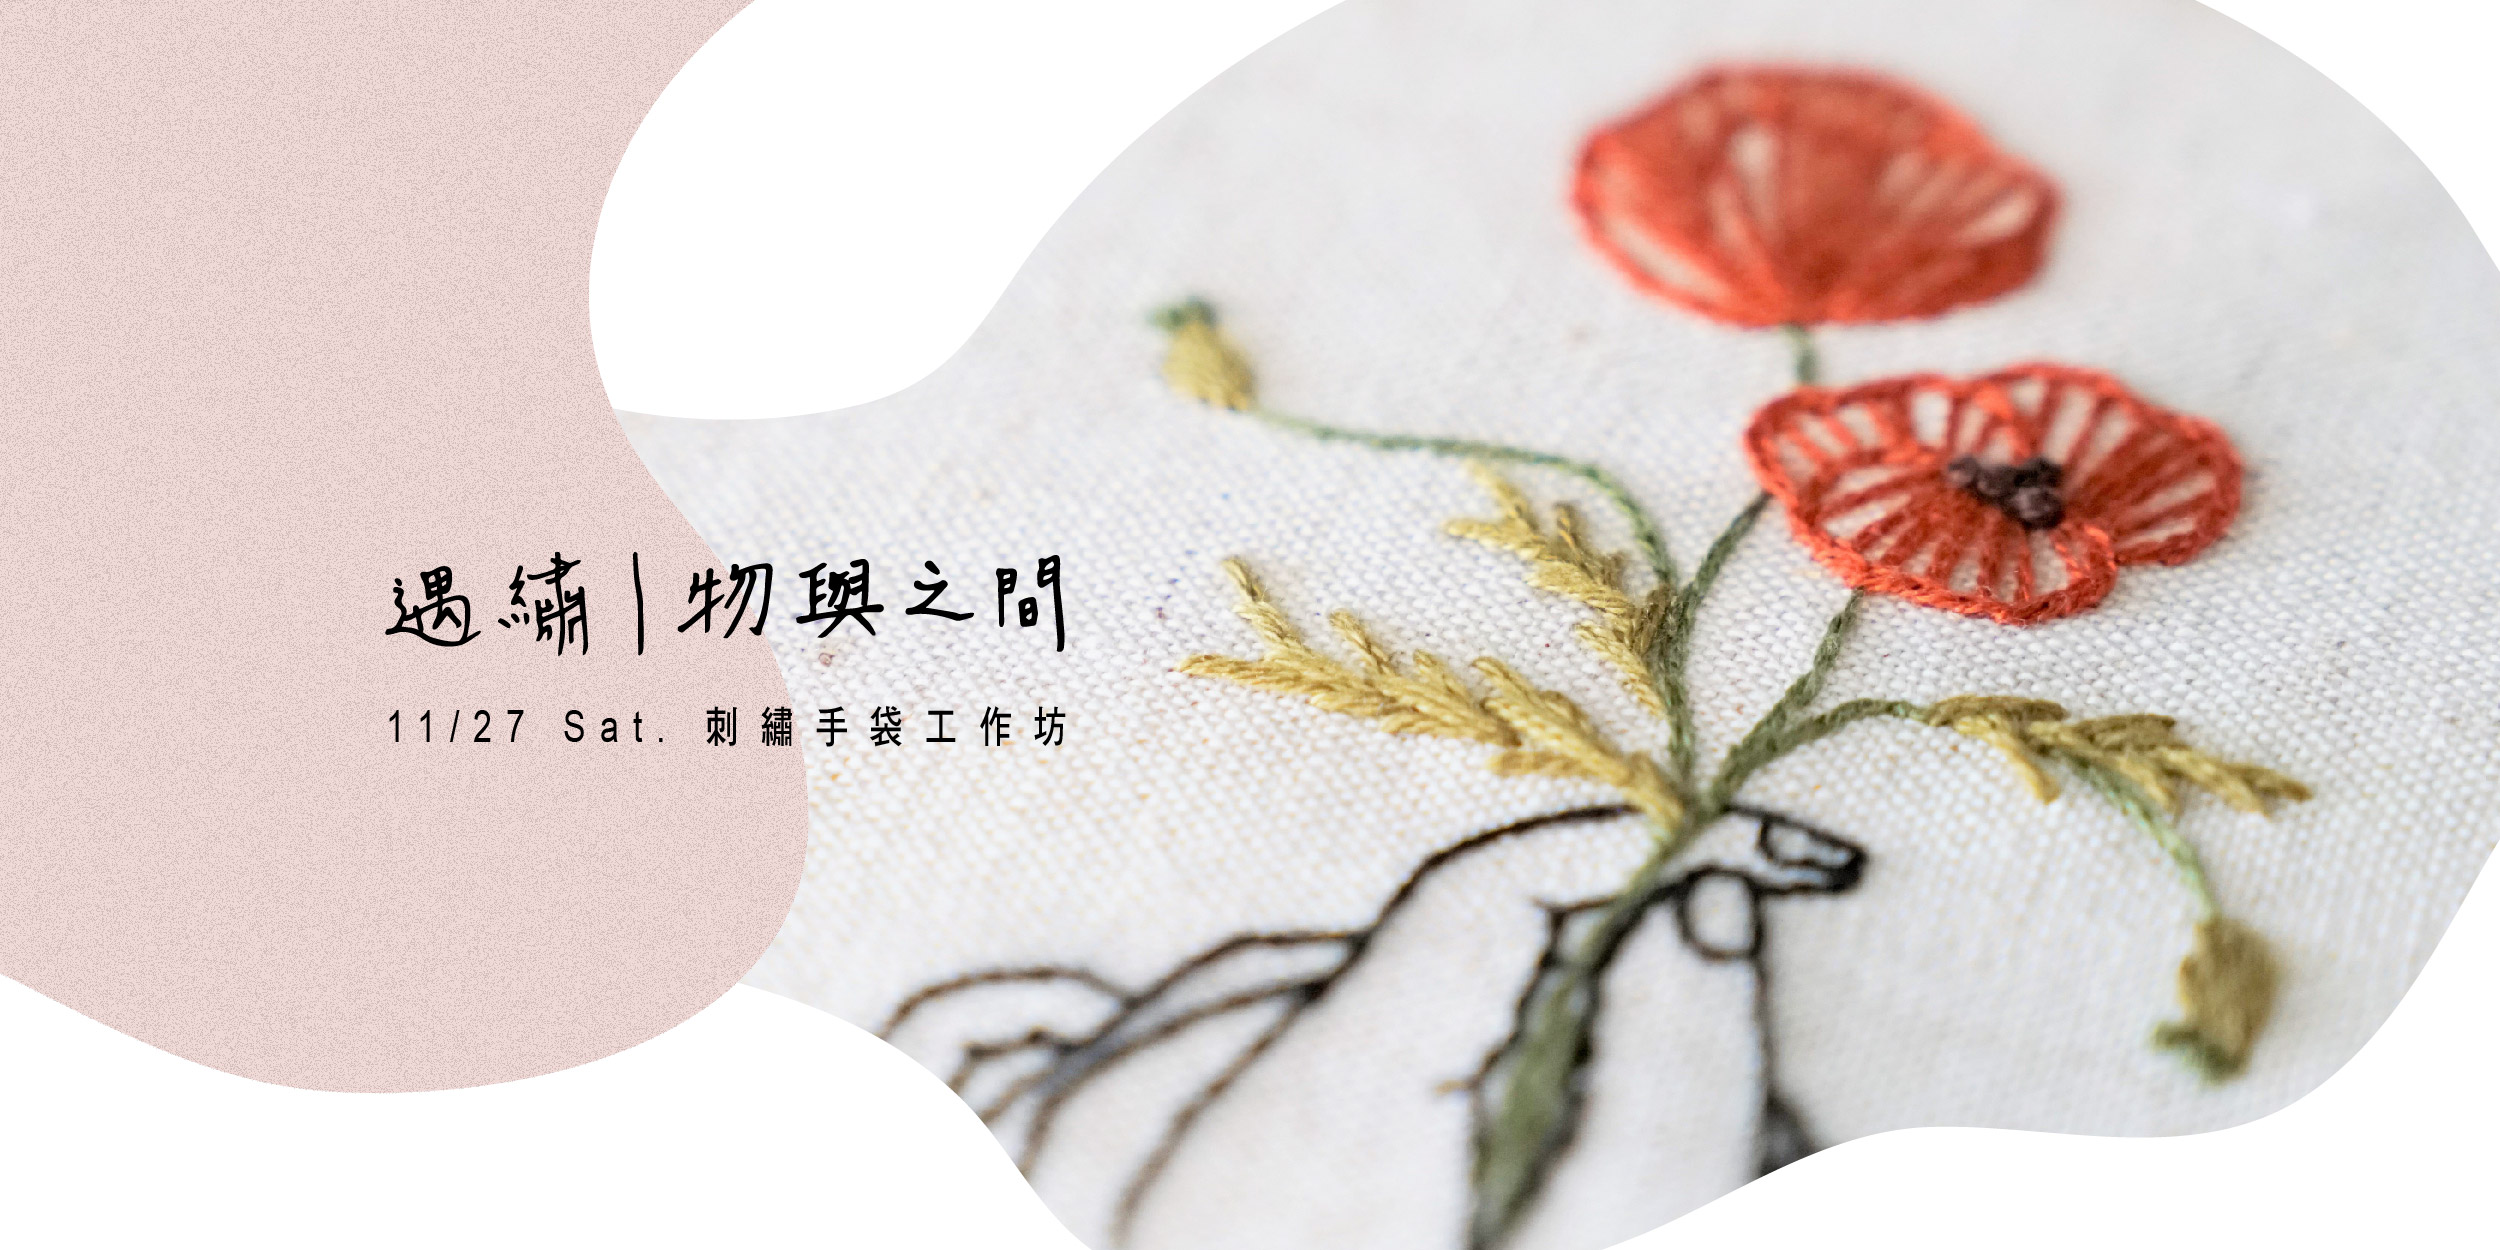 【Workshop】Encounter Embroidery | Objects and In Between—Handbag Embroidery Workshop